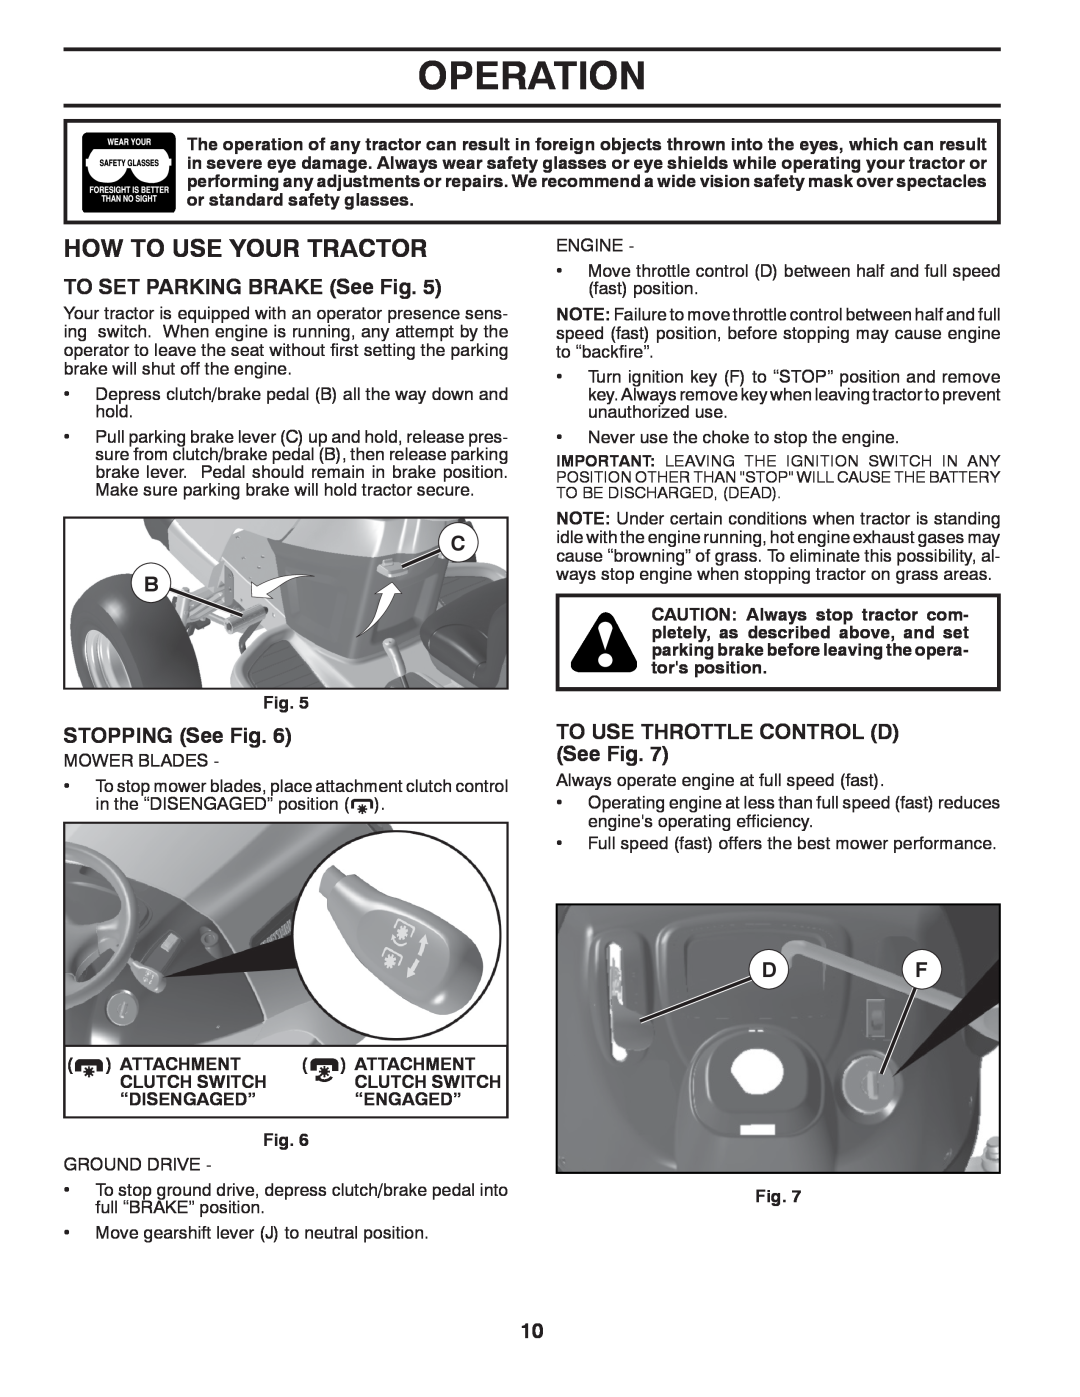 McCulloch 96041011501 manual How To Use Your Tractor, Operation, TO SET PARKING BRAKE See Fig, STOPPING See Fig 